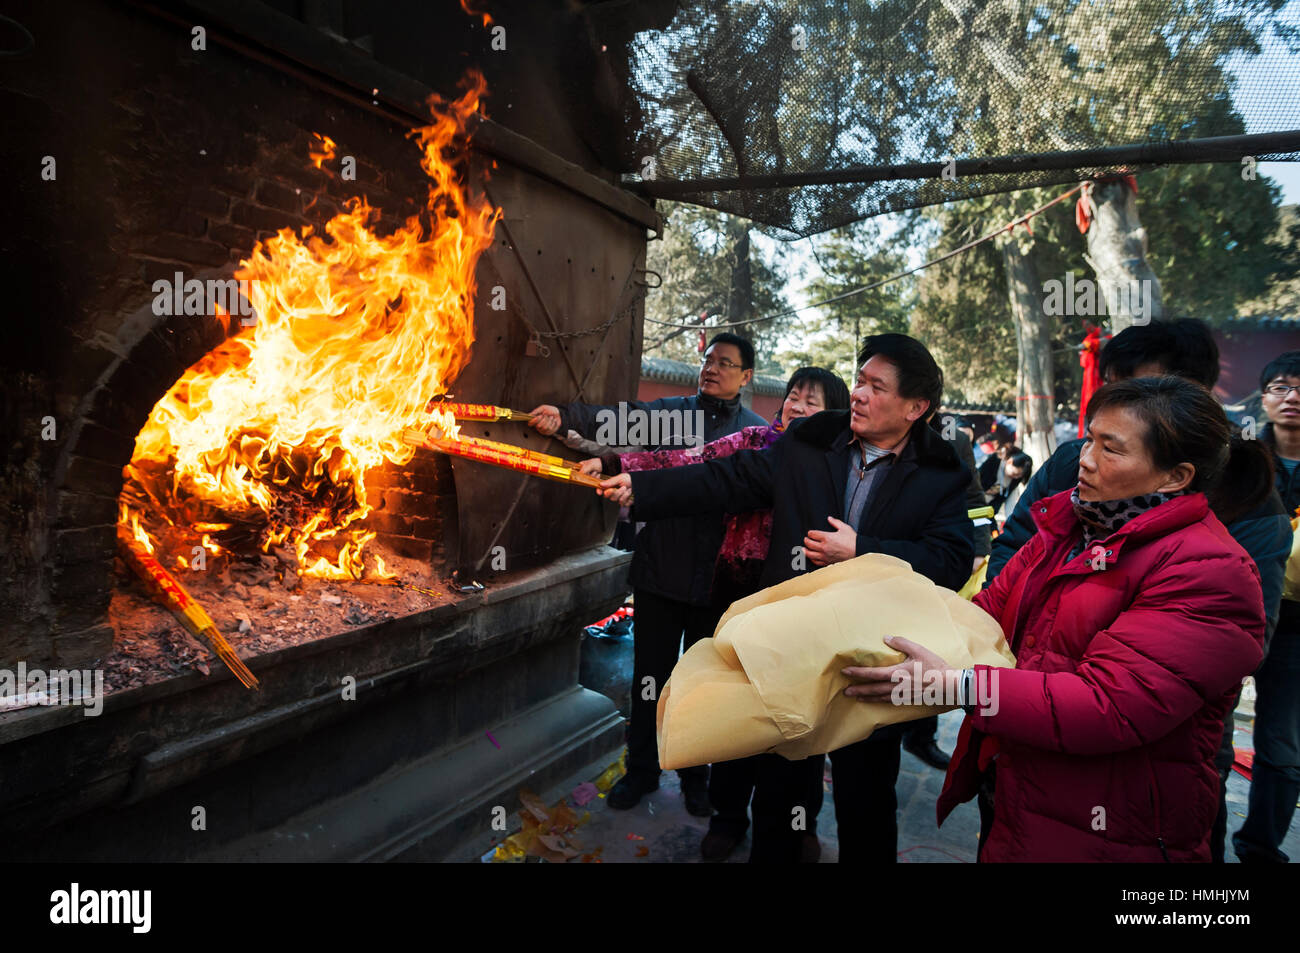 A group of worshippers light incense and throw joss paper into a furnace to celbrate the new year at a temple on Taishan mountain, China Stock Photo